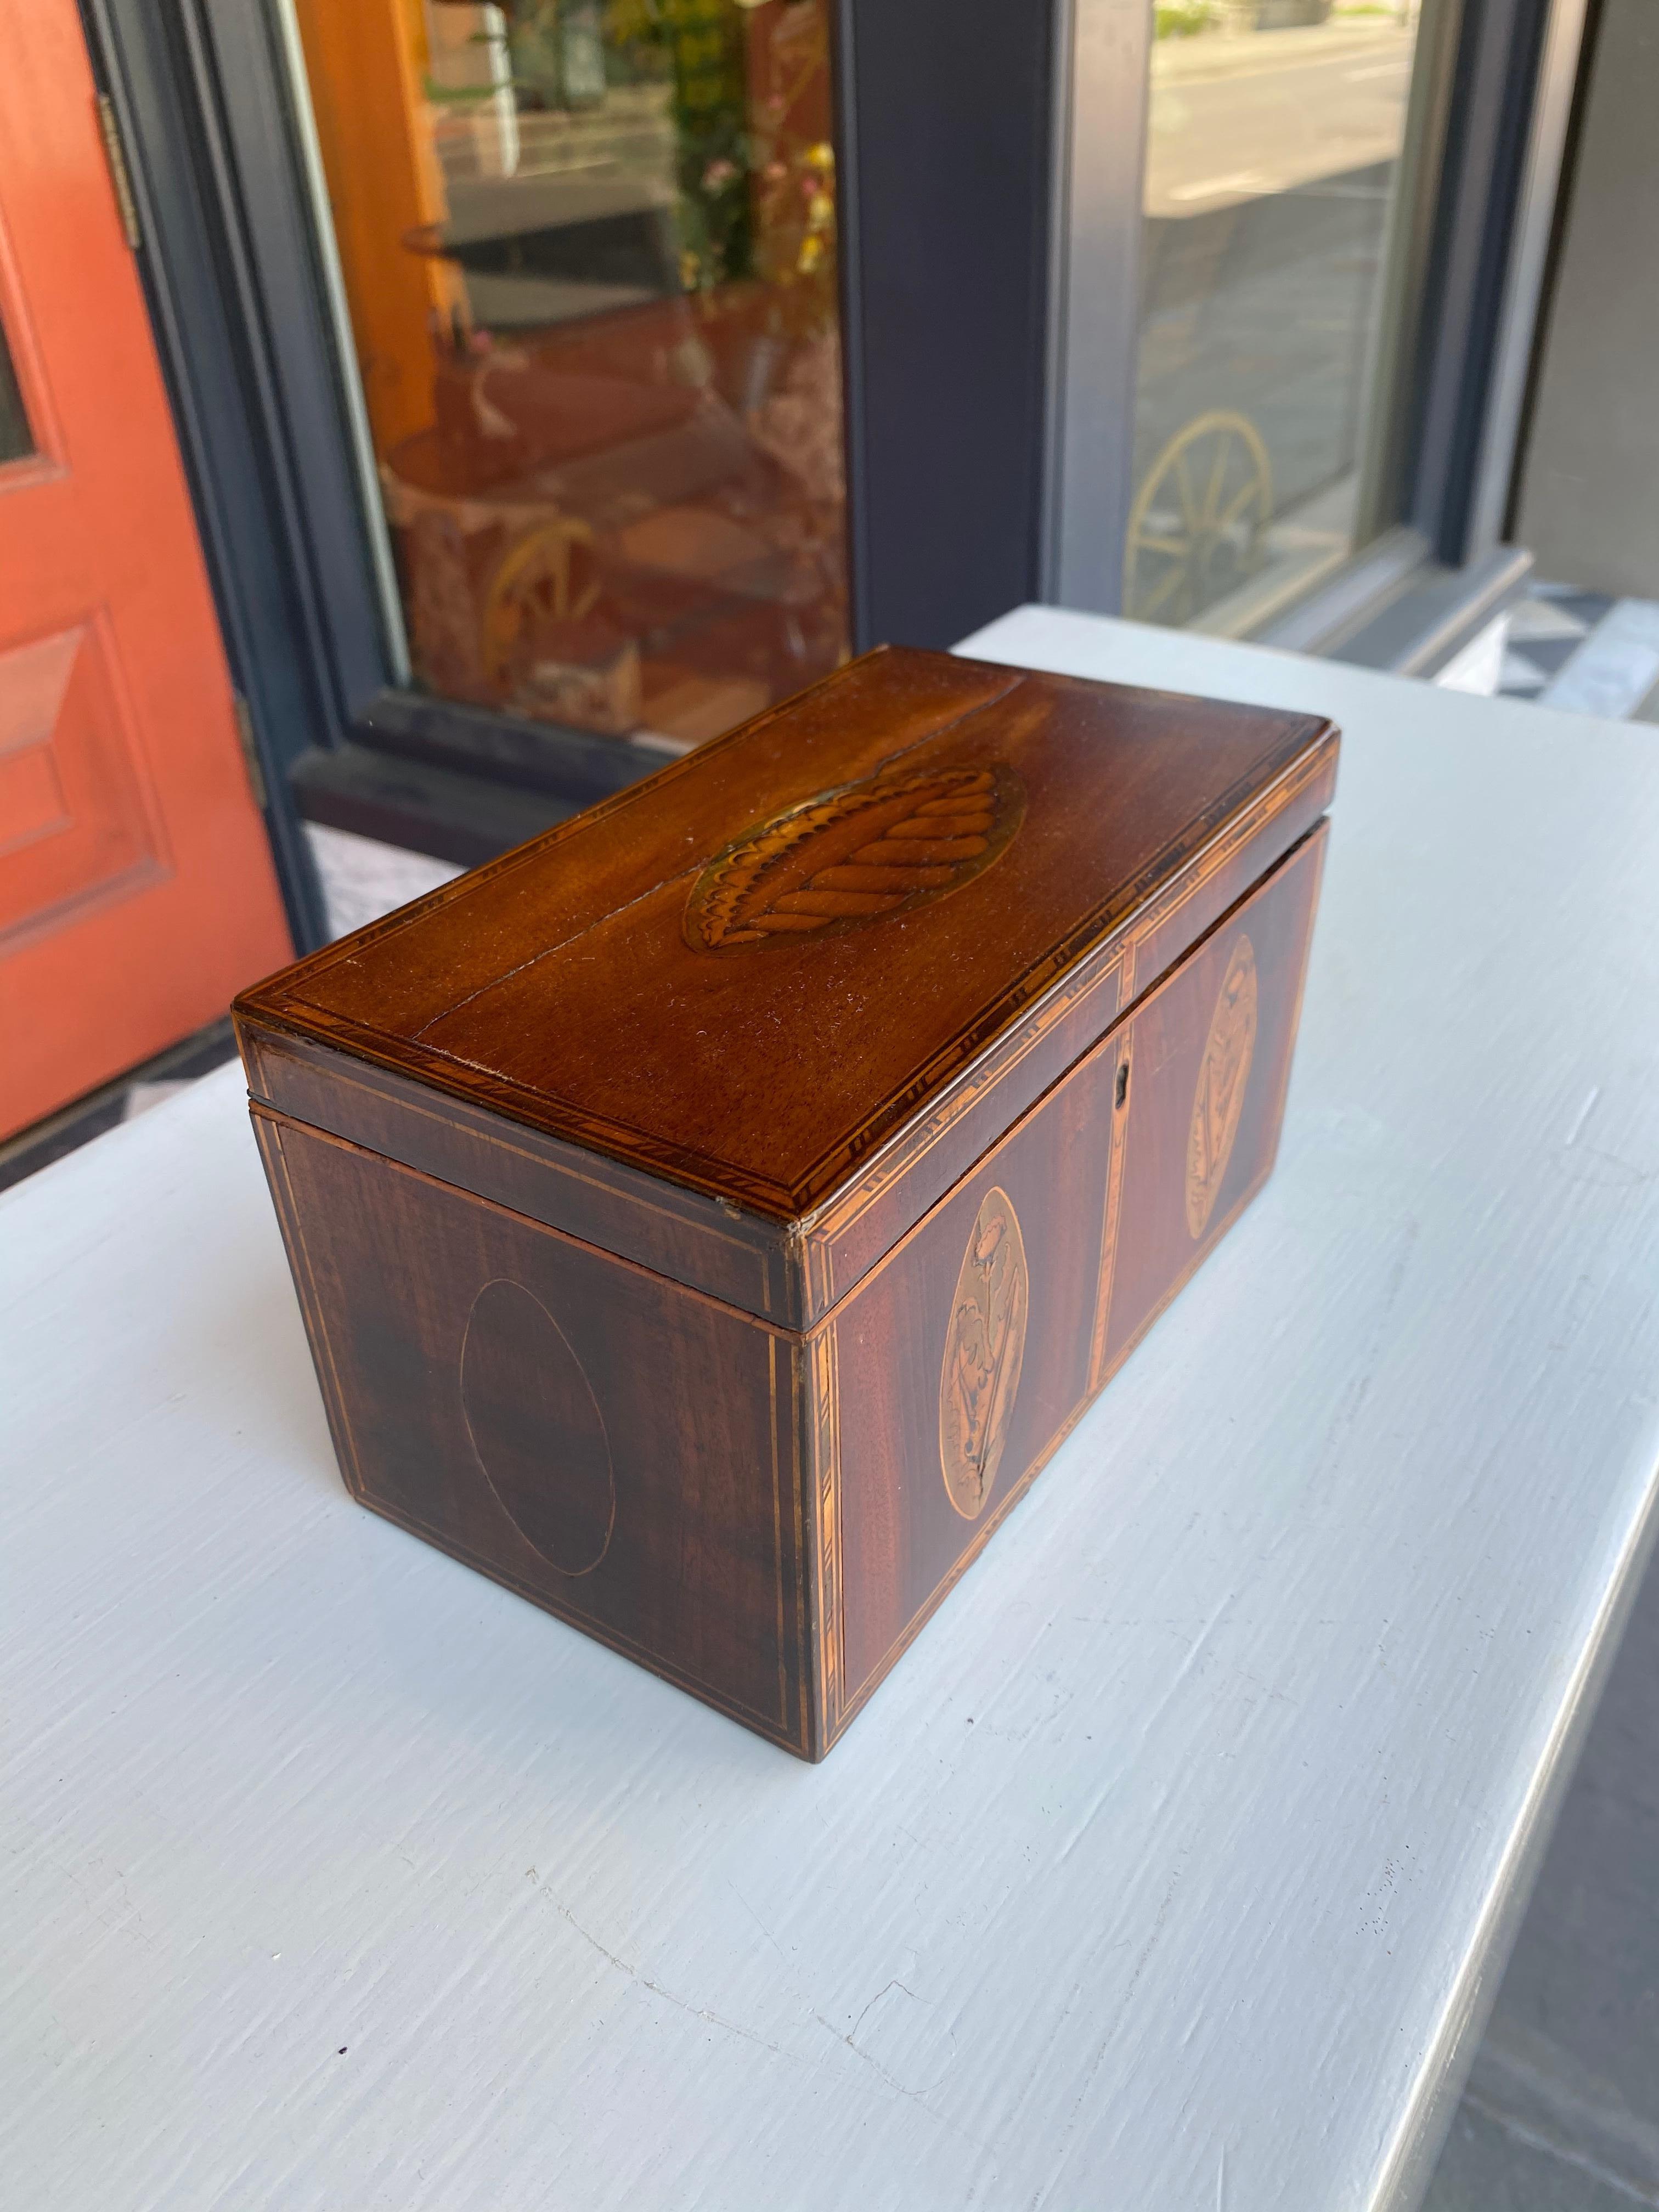 Late 18th Century Mahogany and satin wood inlaid tea caddy with shell motif